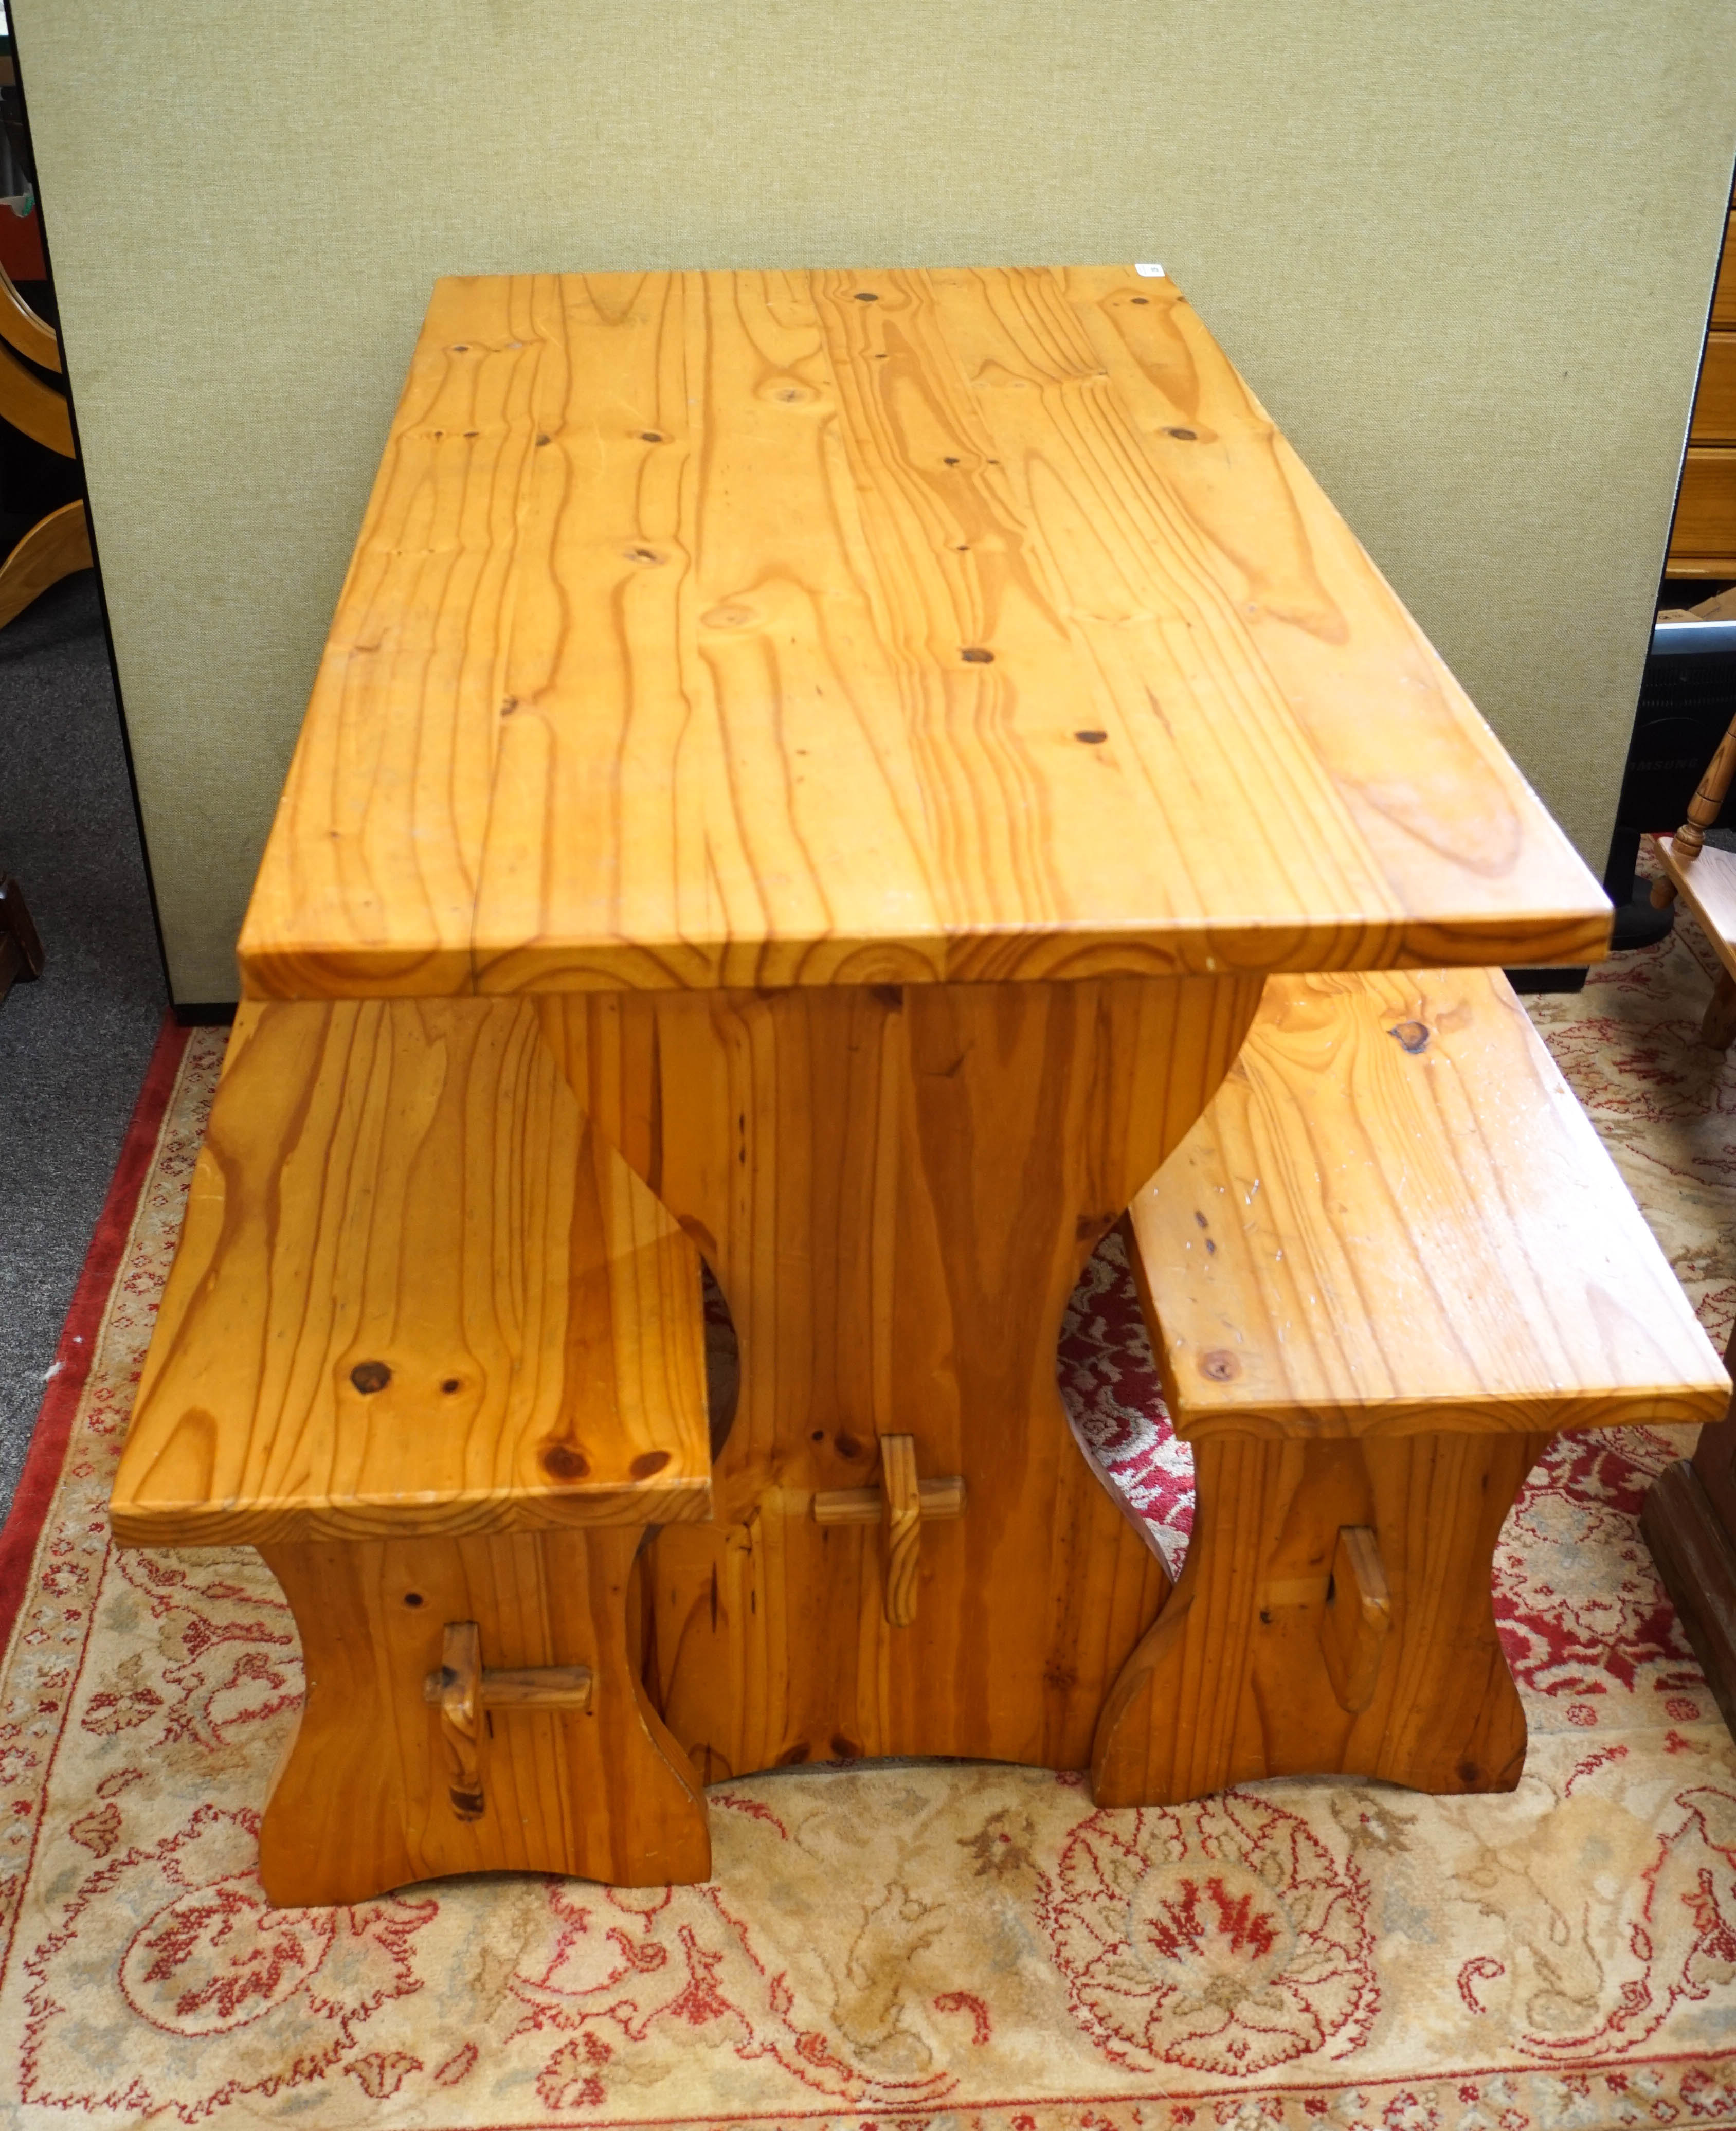 A pine table and two bench seats